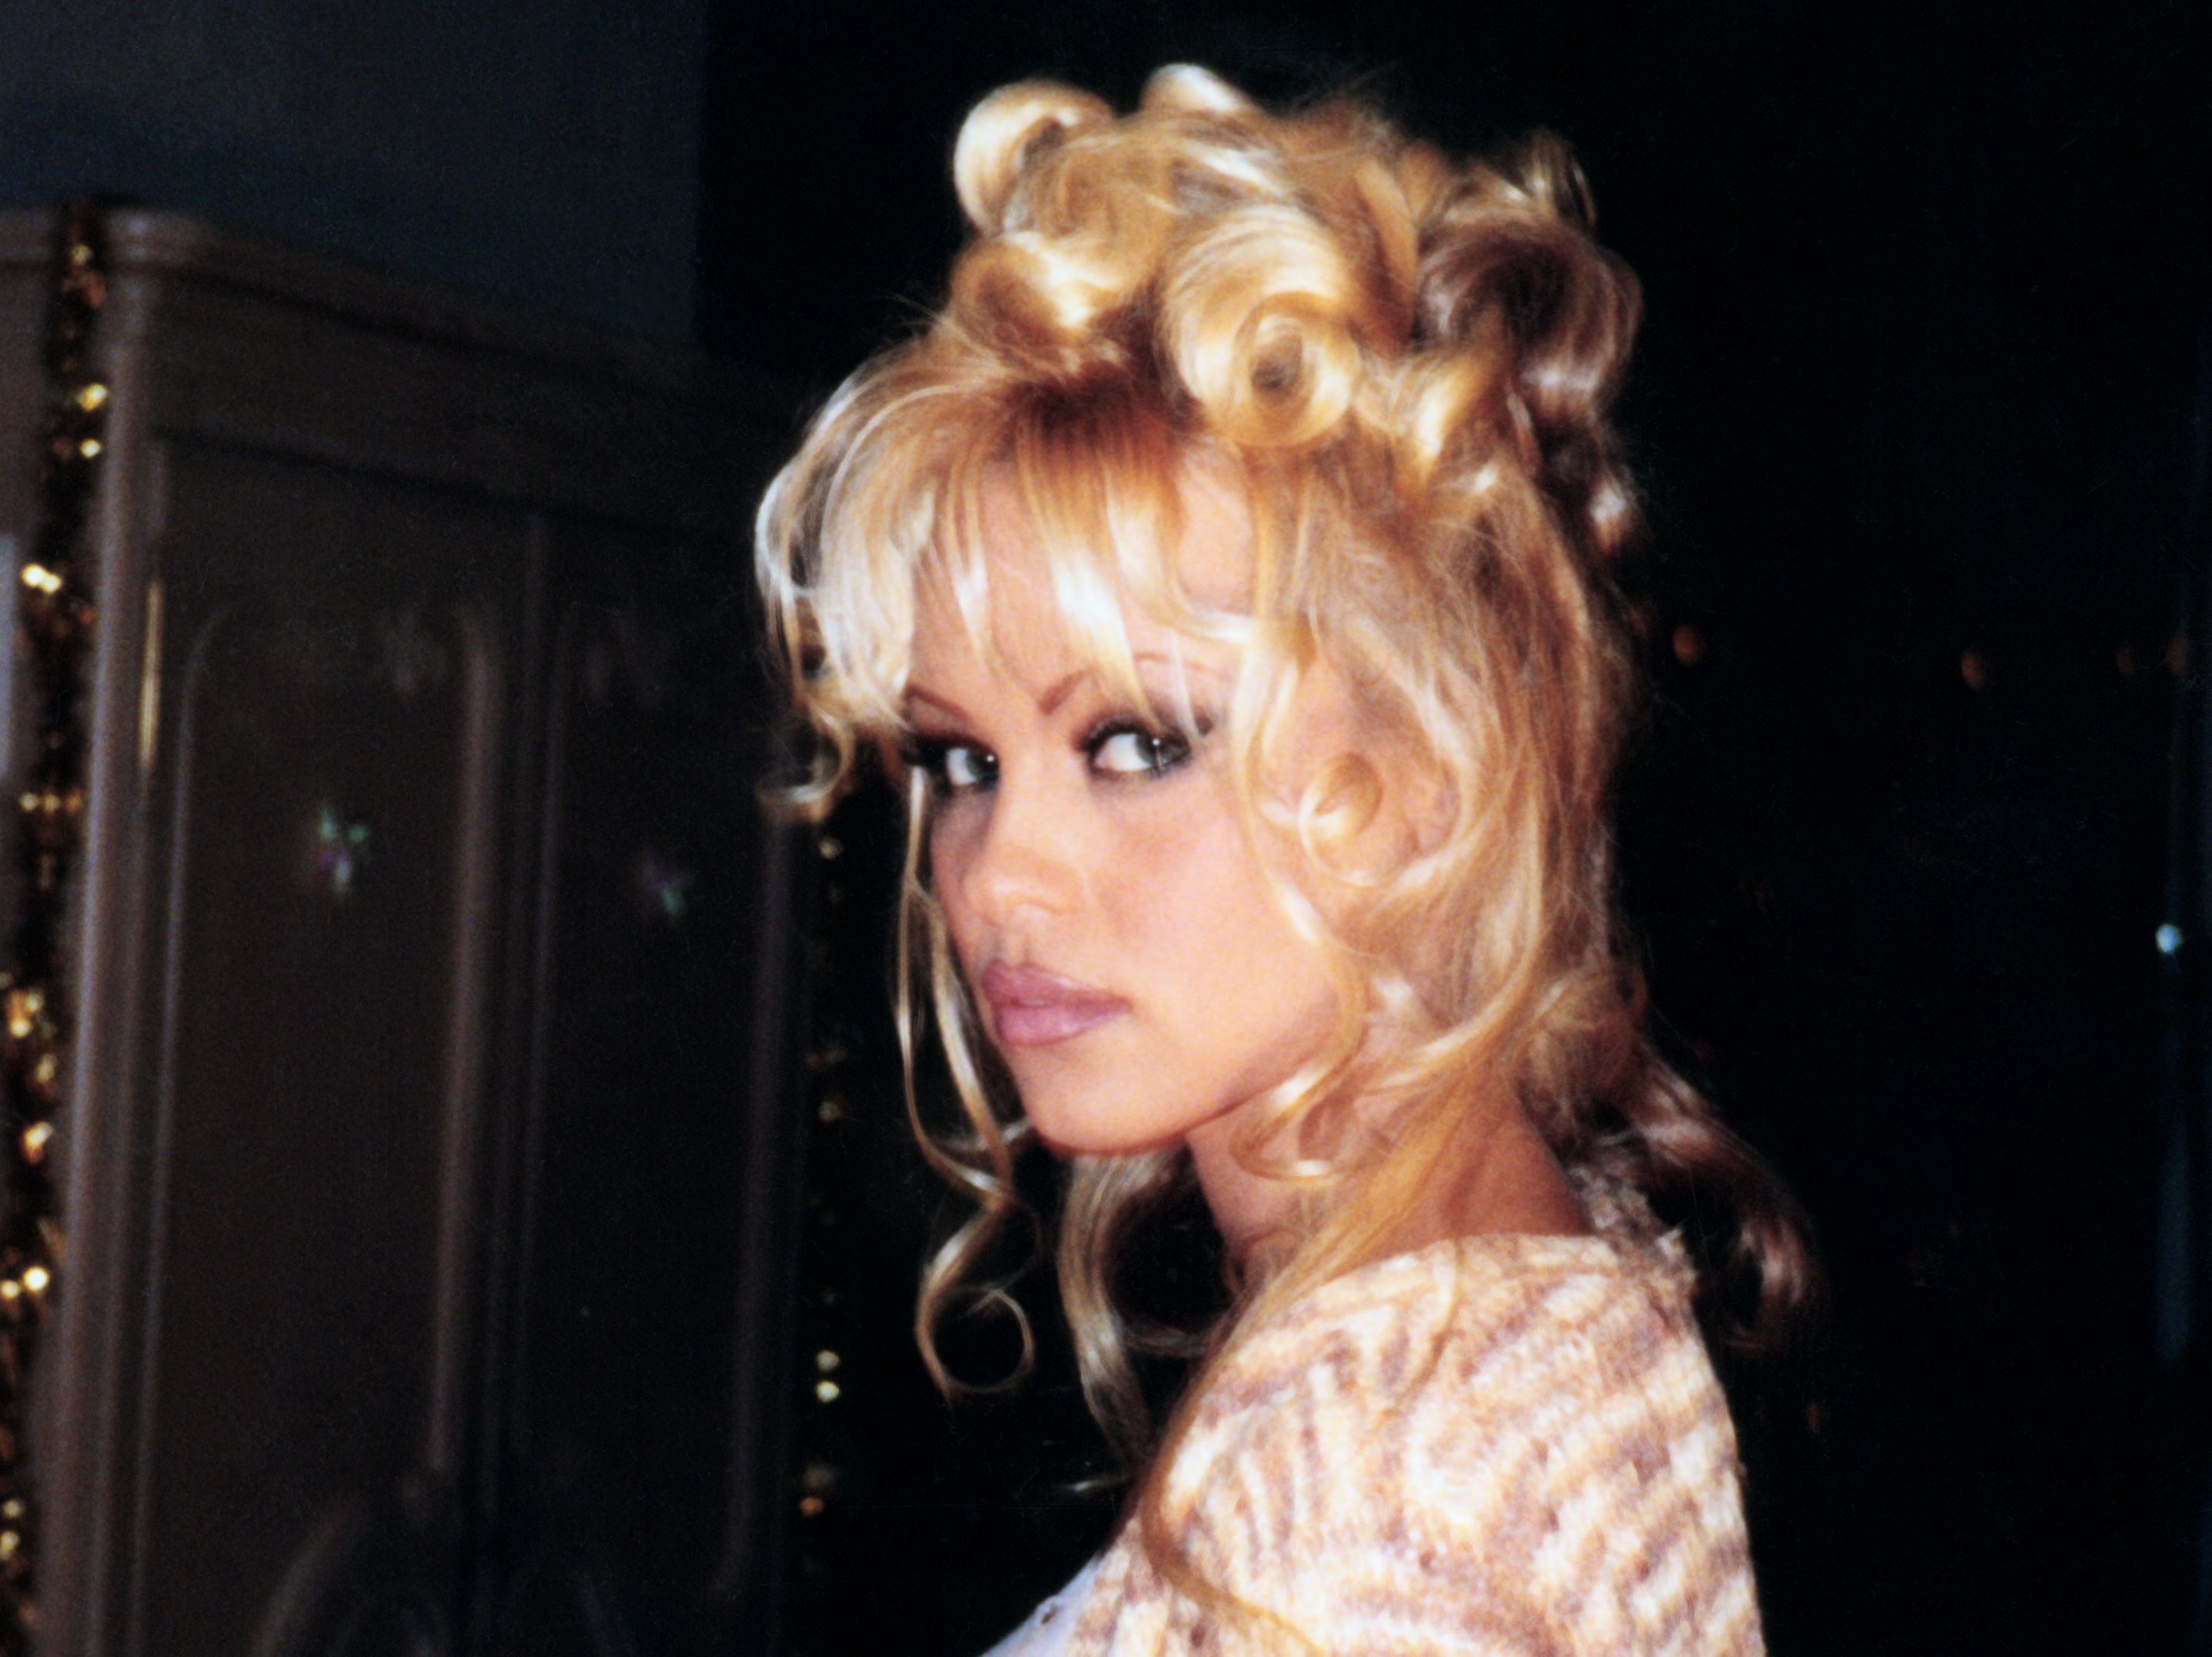 Pamela Anderson is the subject of a new Netflix documentary